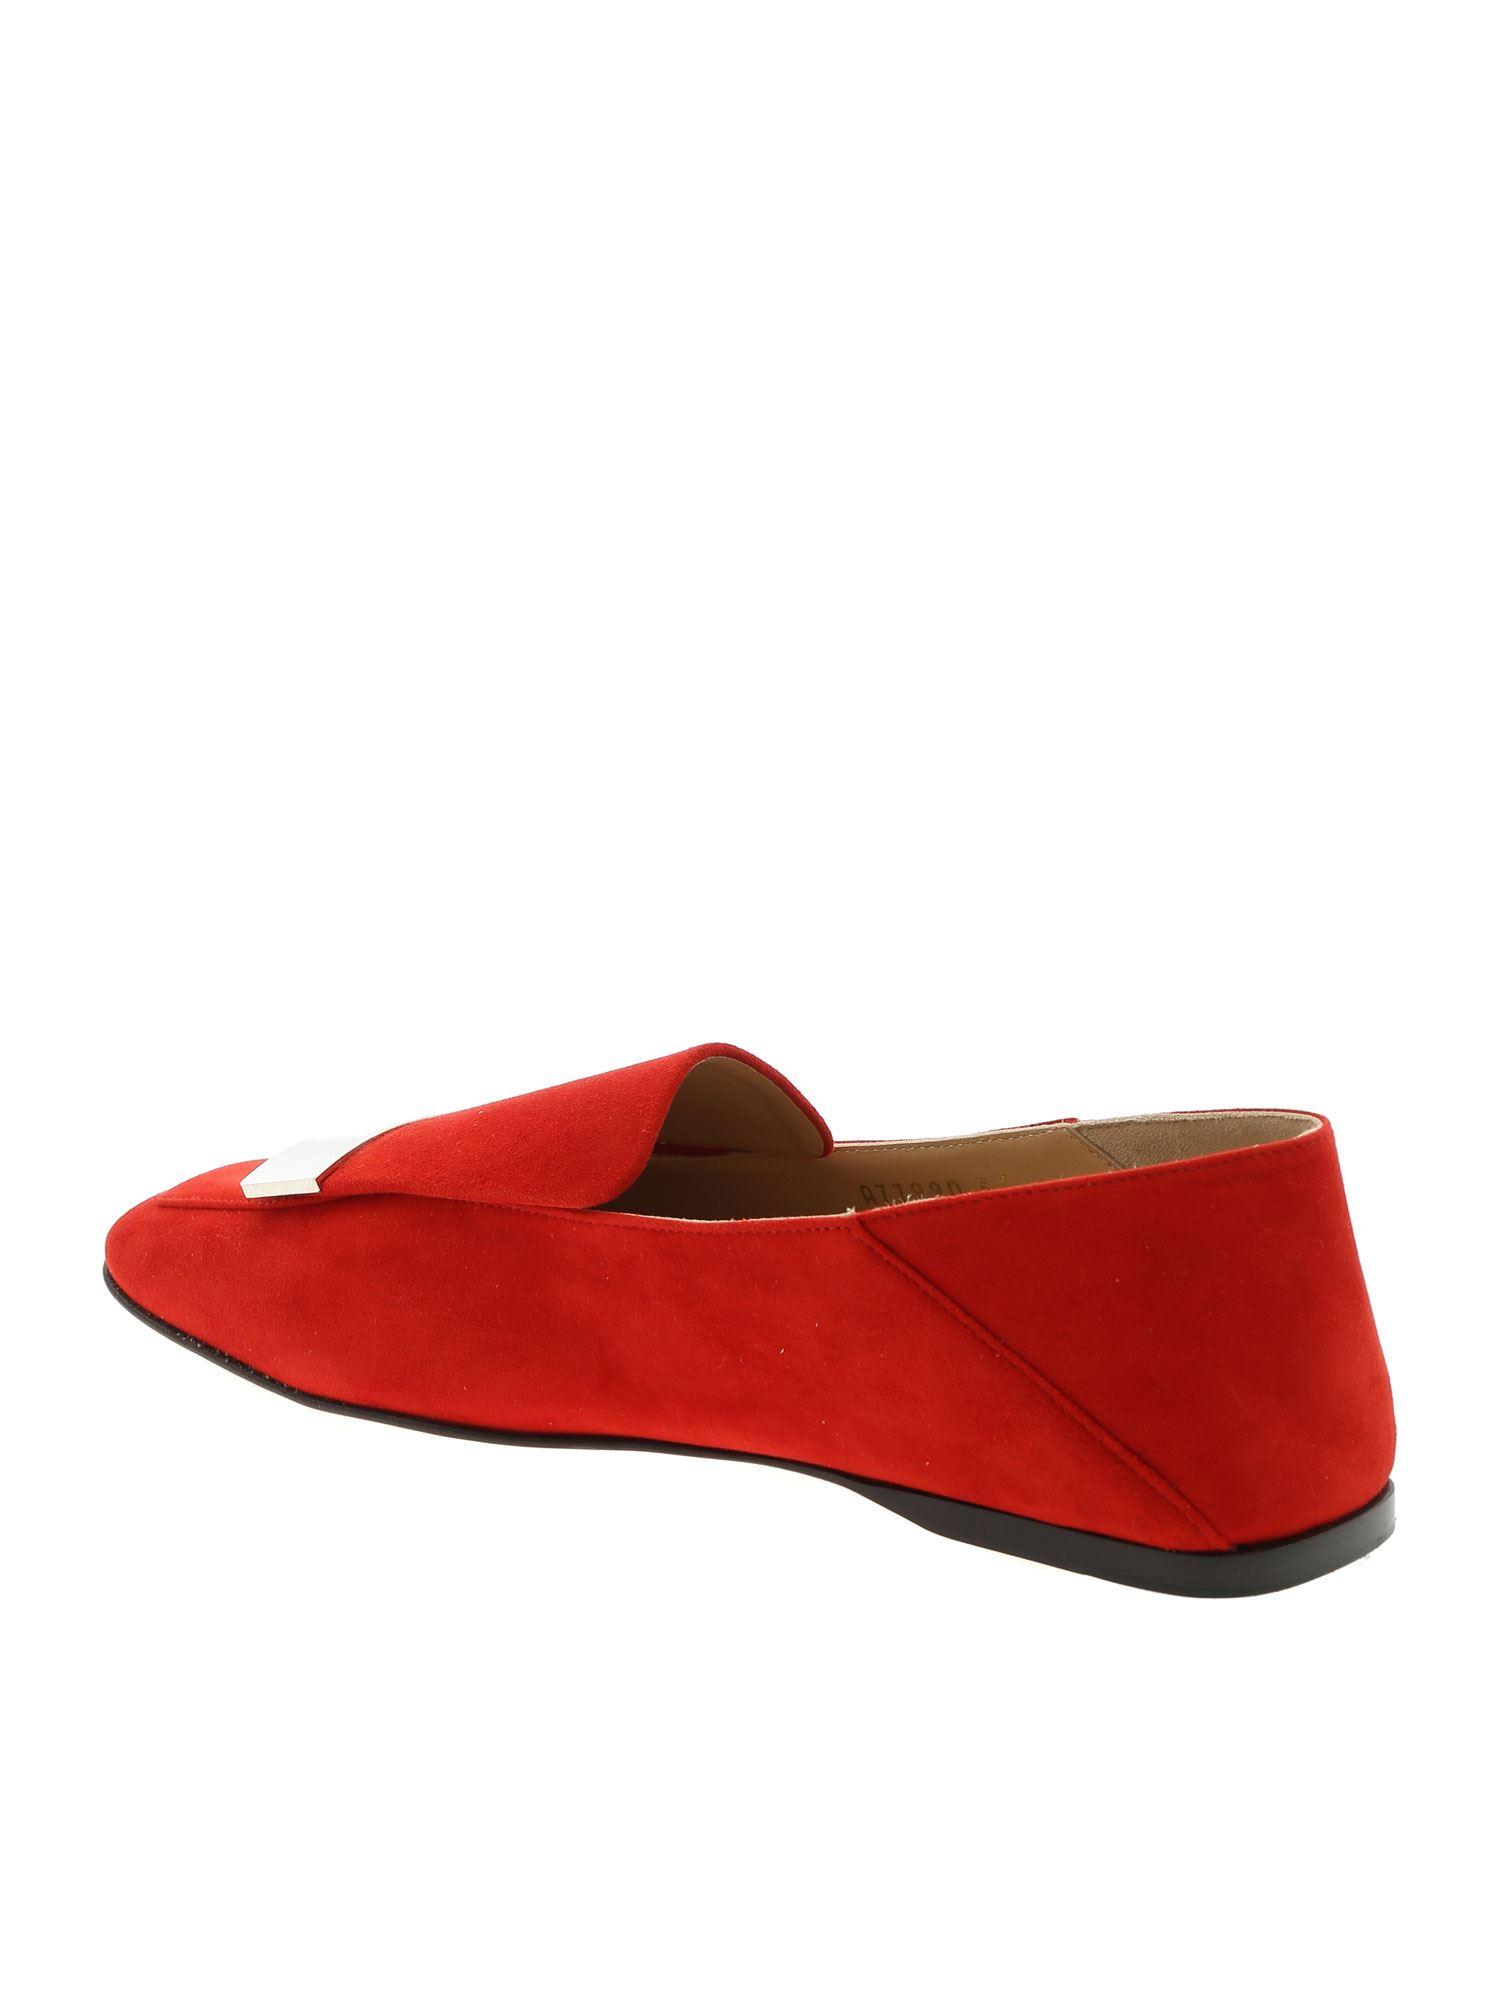 red and silver loafers